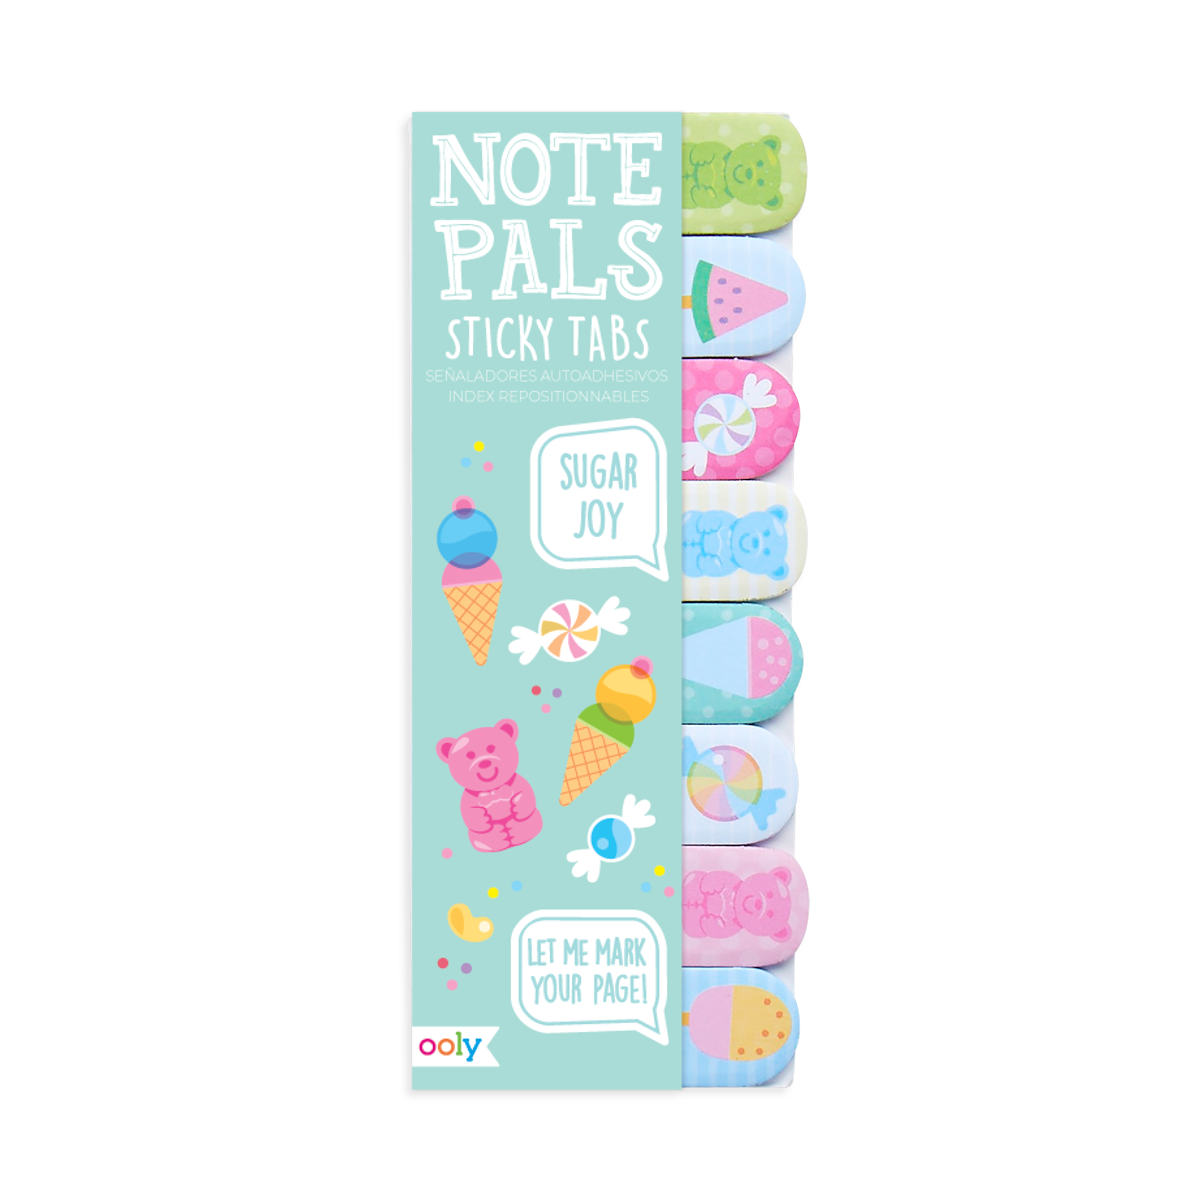 OOLY Note Pals Sticky Tabs - Sugar Joy in packaging